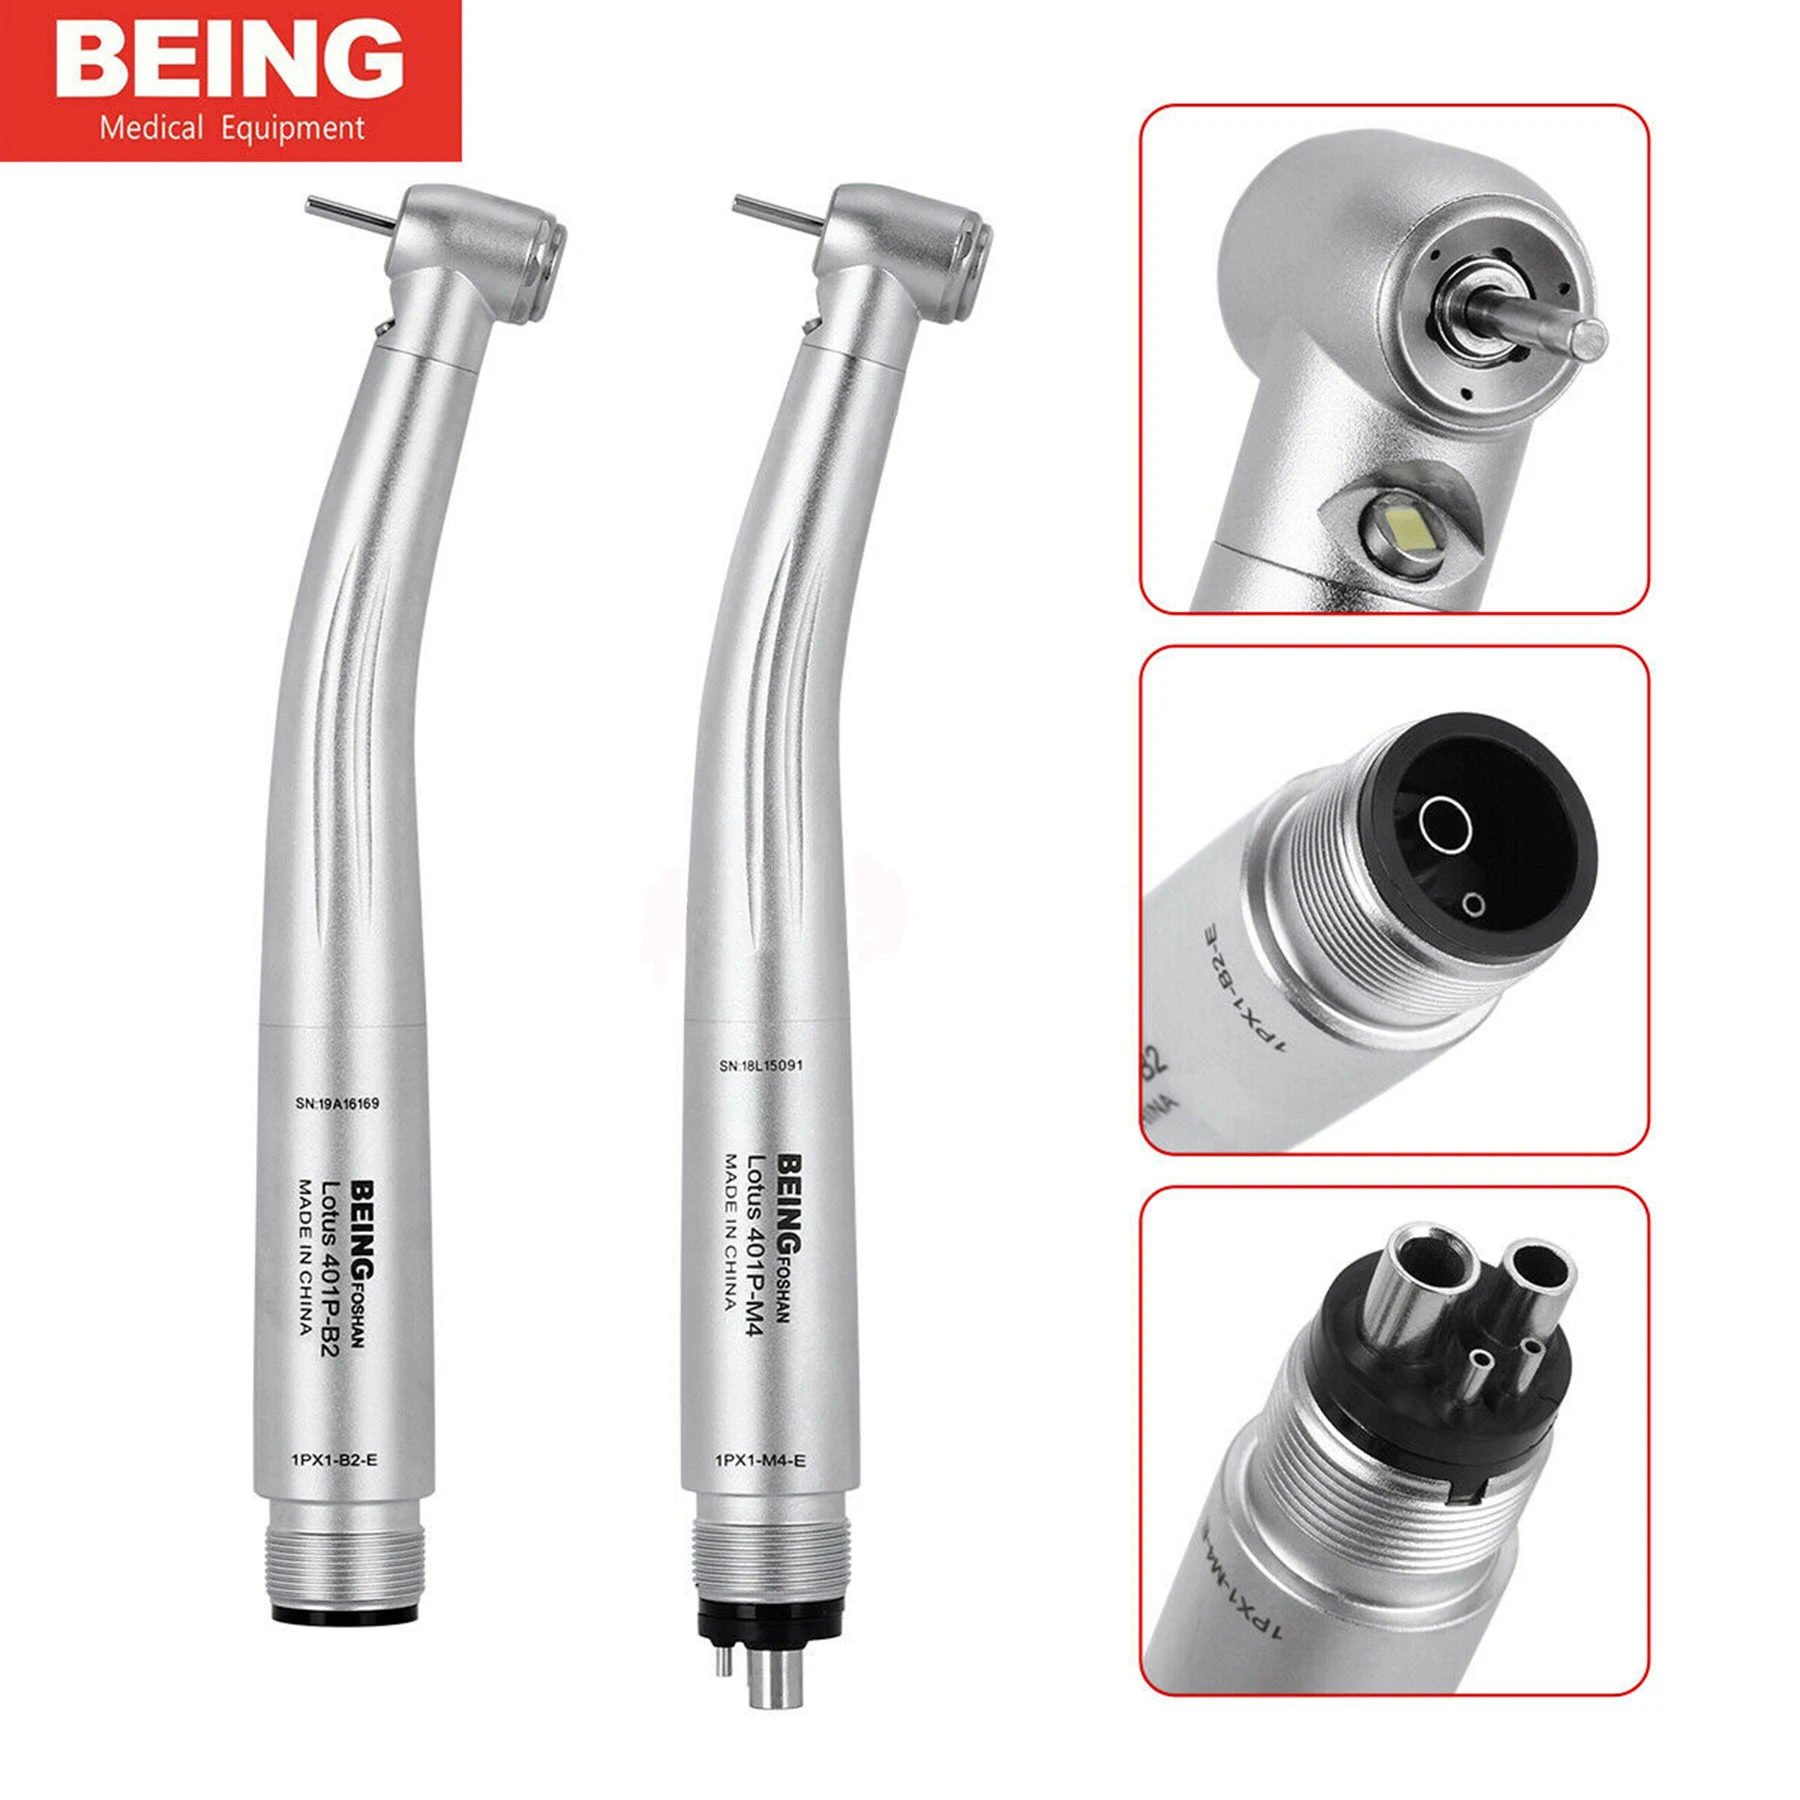 

Being Dental High Speed LED Self Power E-Generator Air Turbine Push Button Handpiece 401PX-E 2/4 Holes Fit for NSK PANA MAX Type